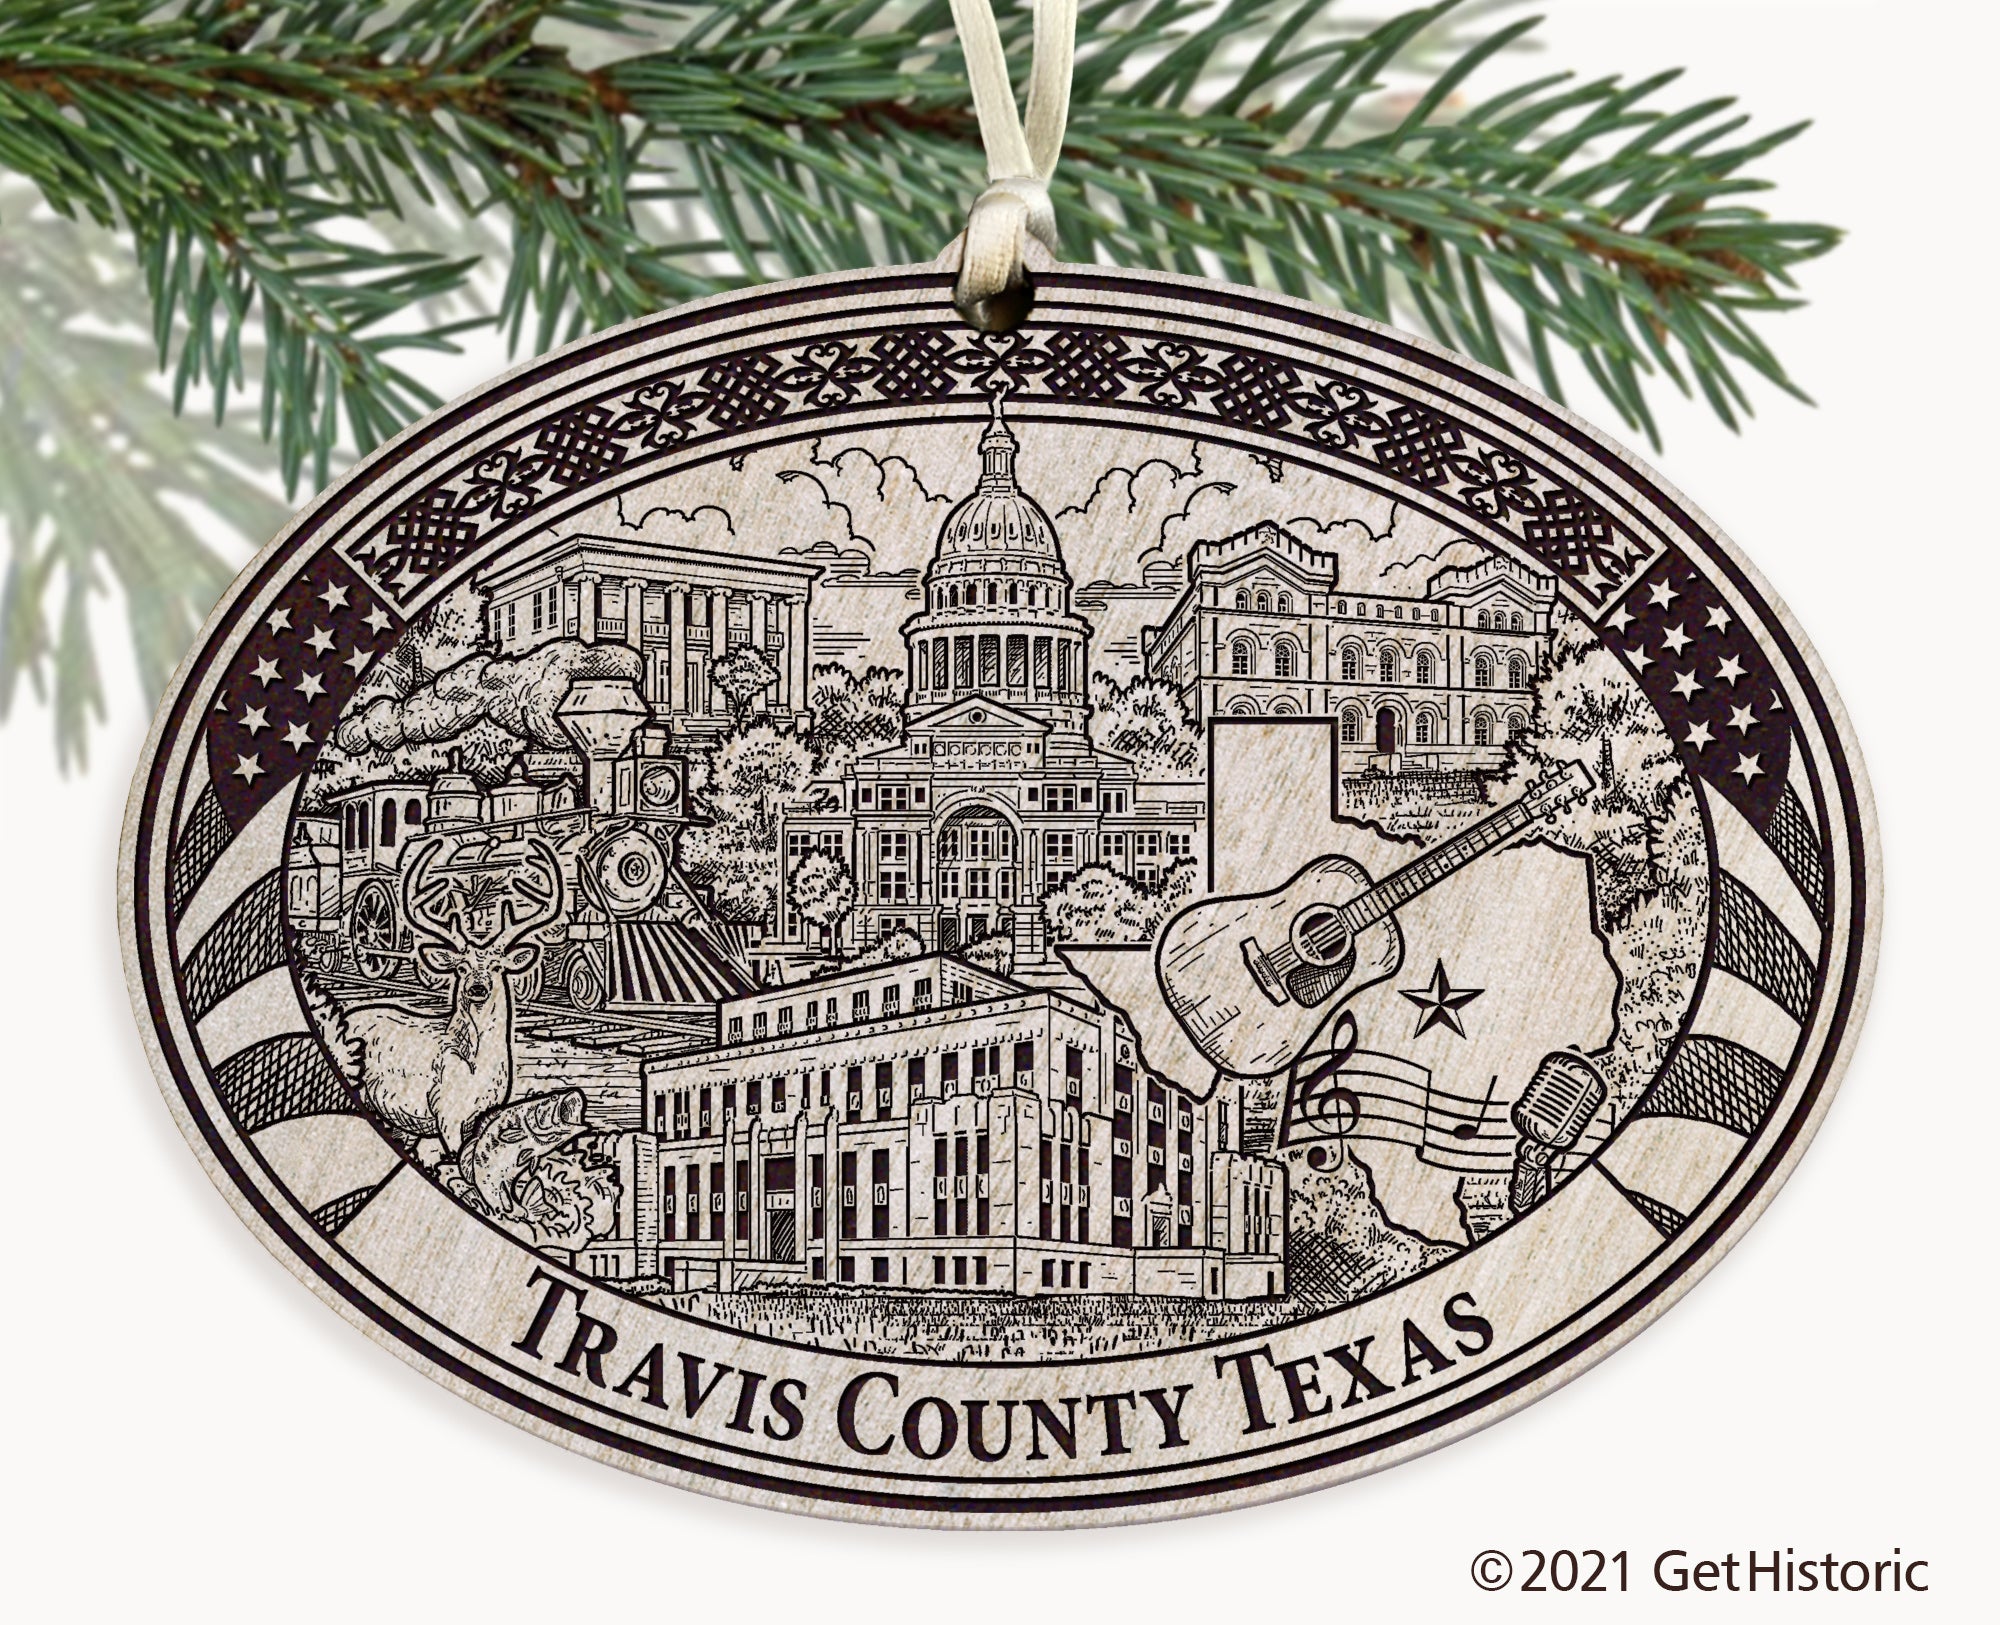 Travis County Texas Engraved Ornament